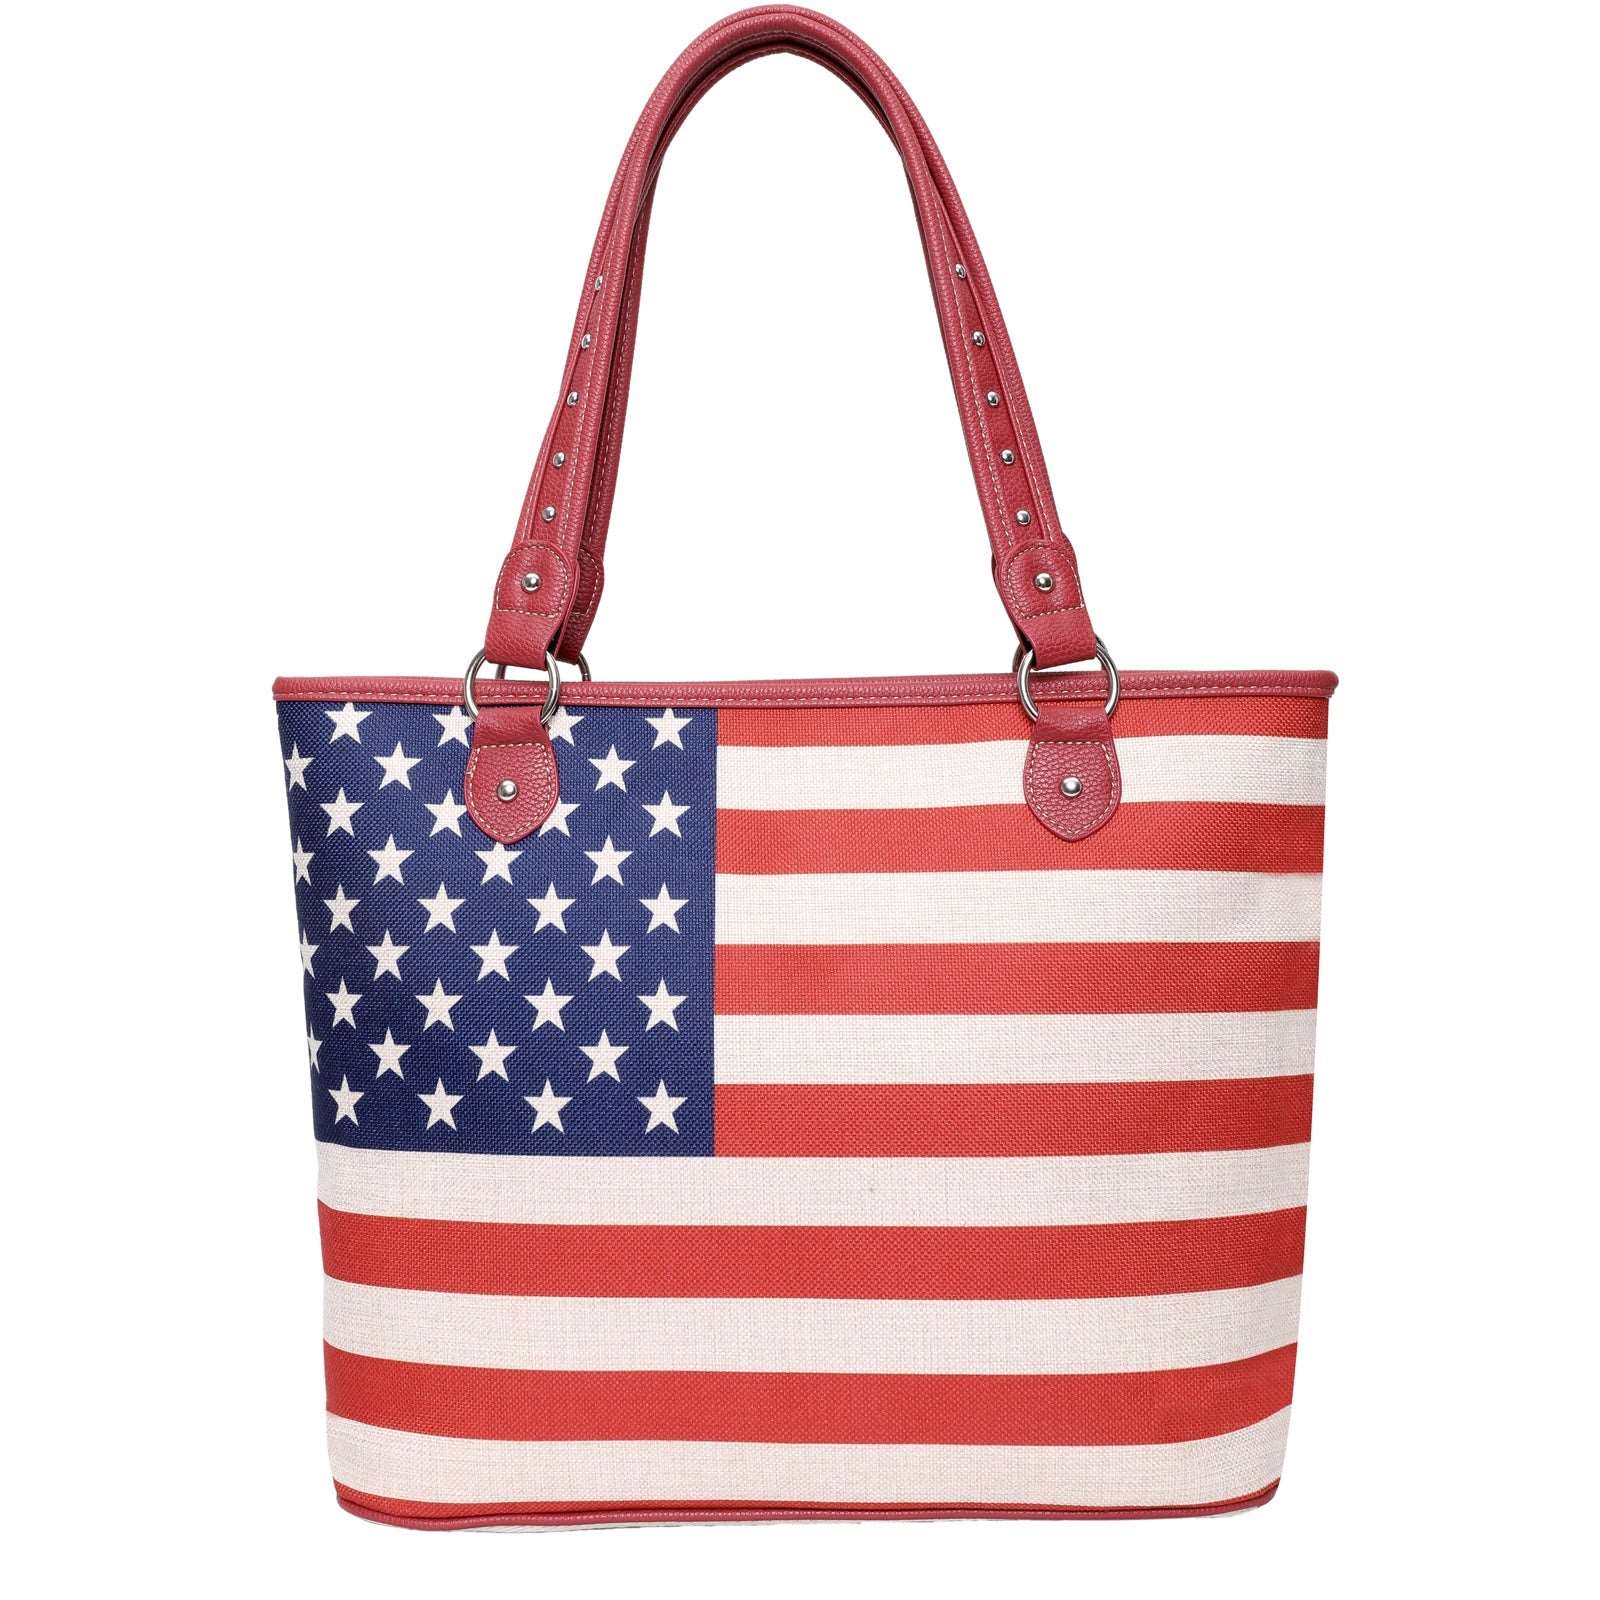 Montana West American Pride Canvas Tote Bag - Montana West World